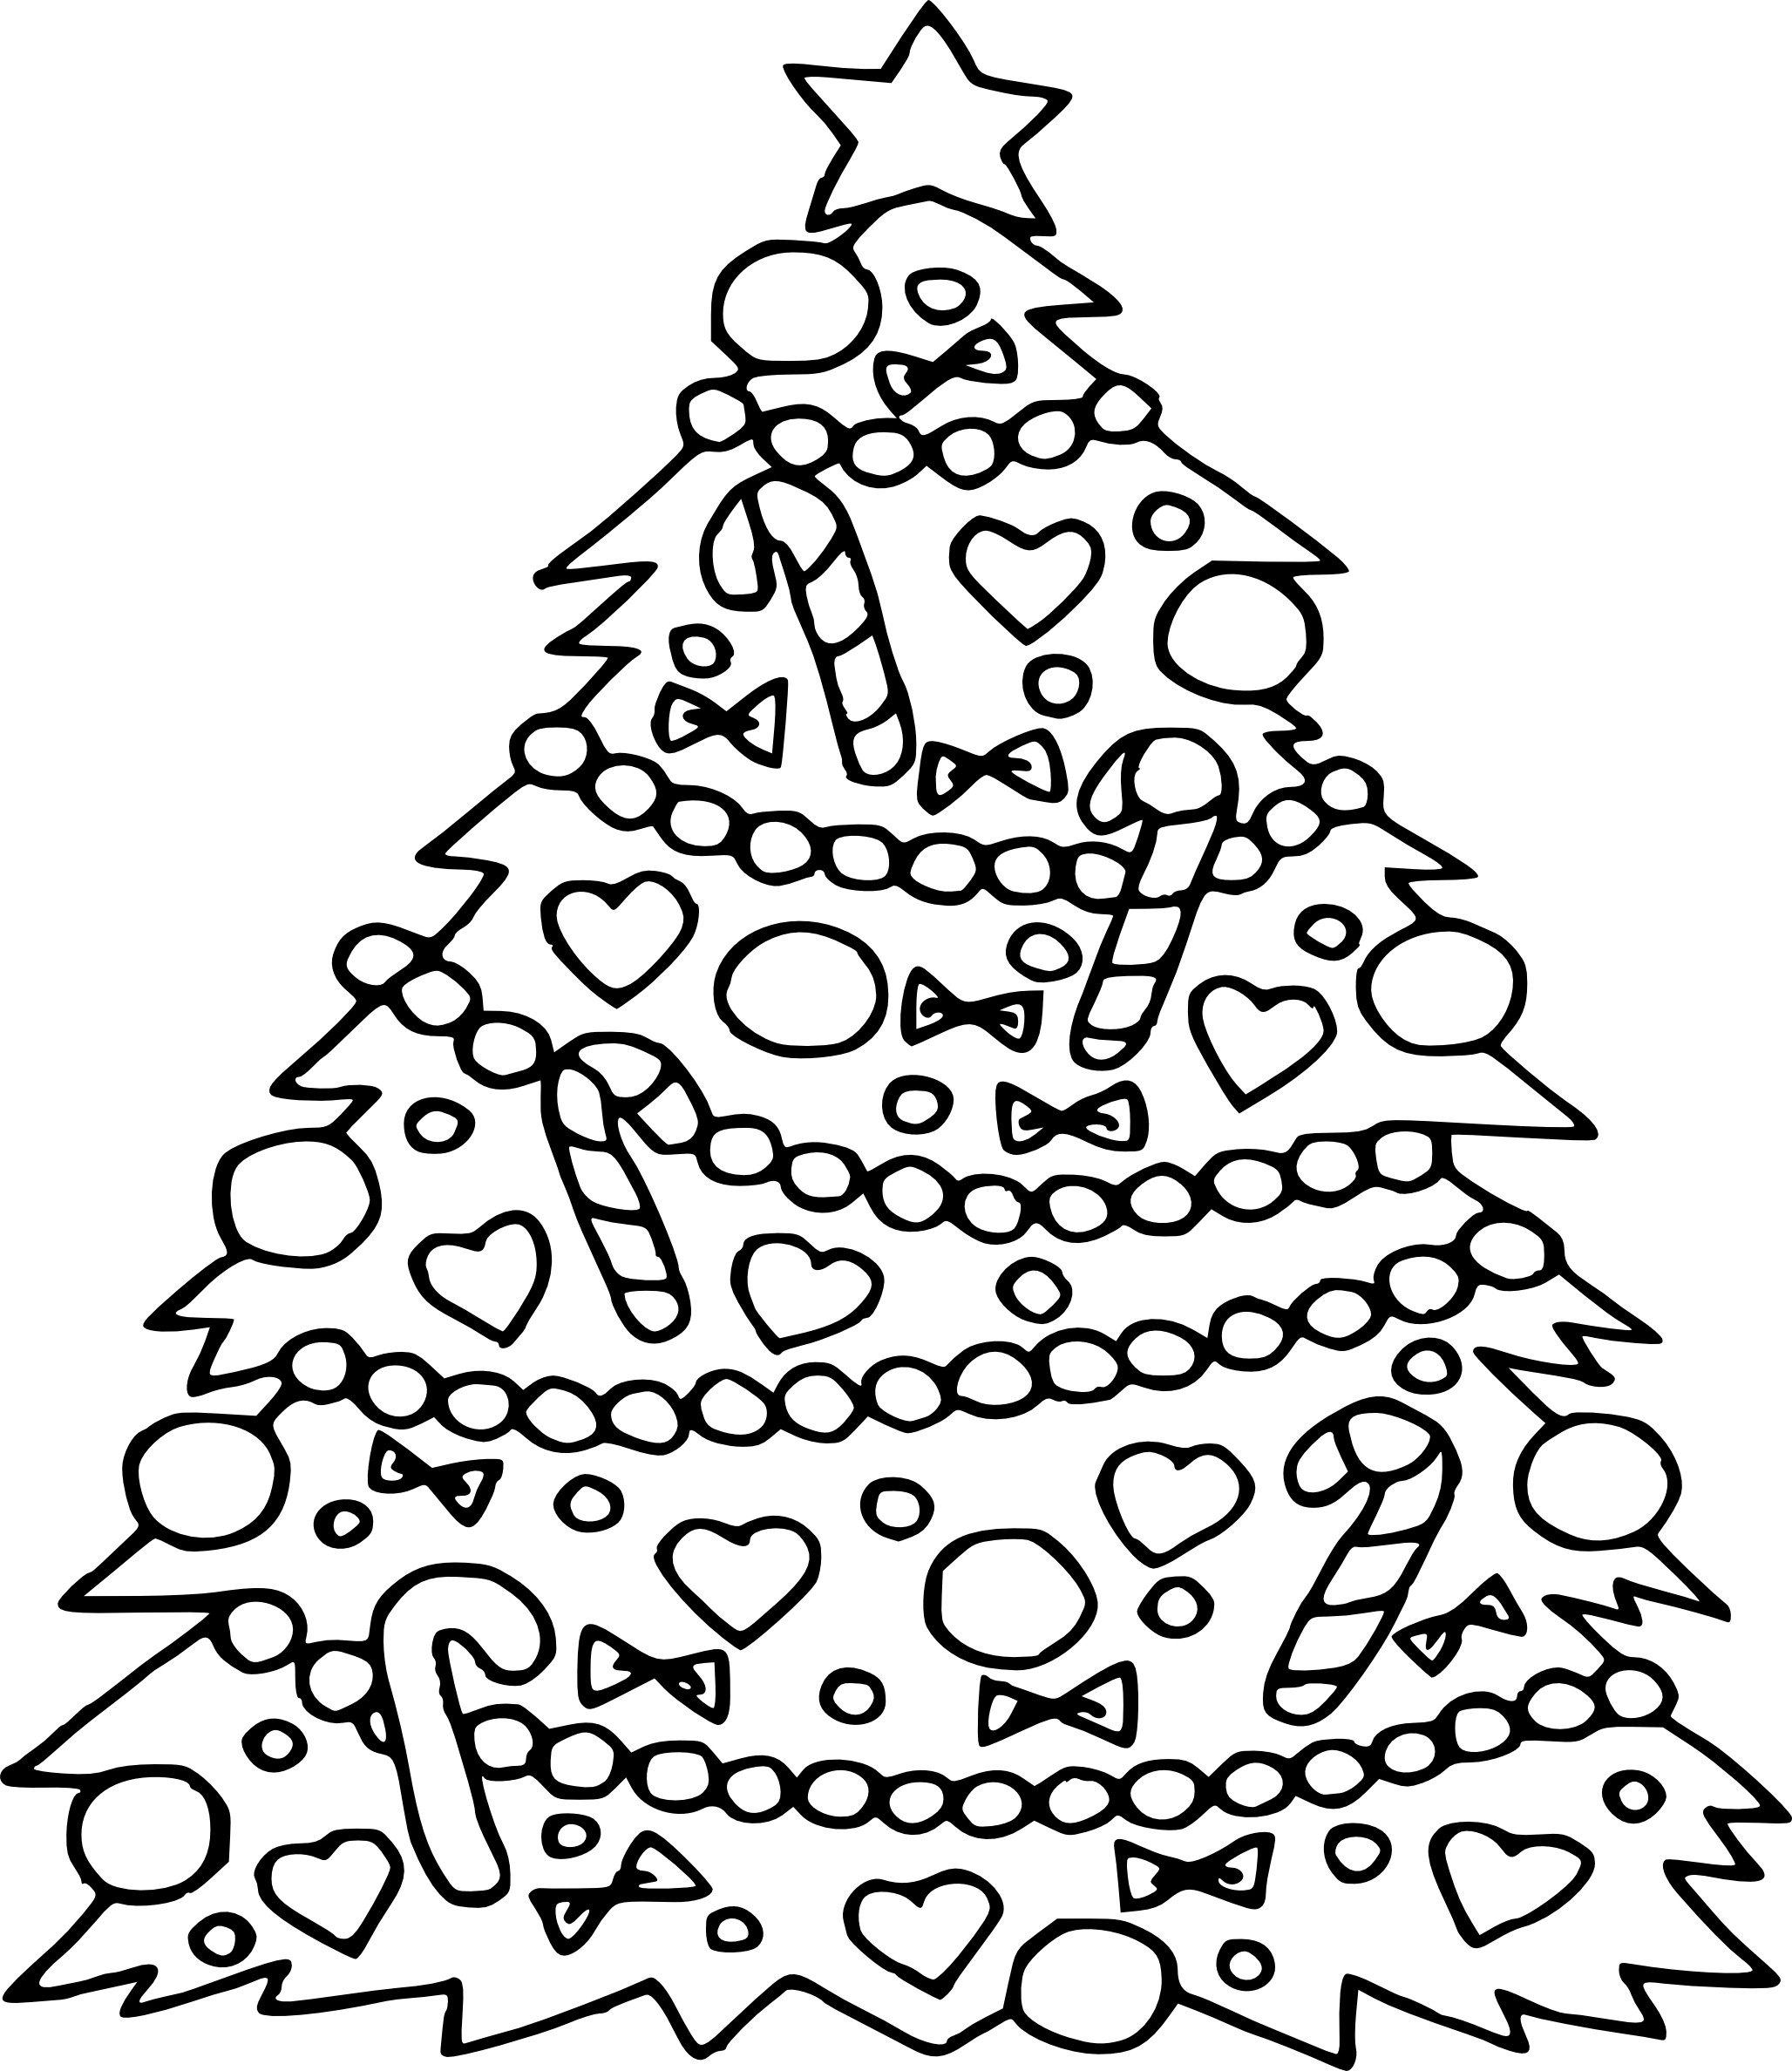 Coloring Book Pages Of Christmas Trees
 Christmas Tree Coloring Pages Printable Qqa Free Free